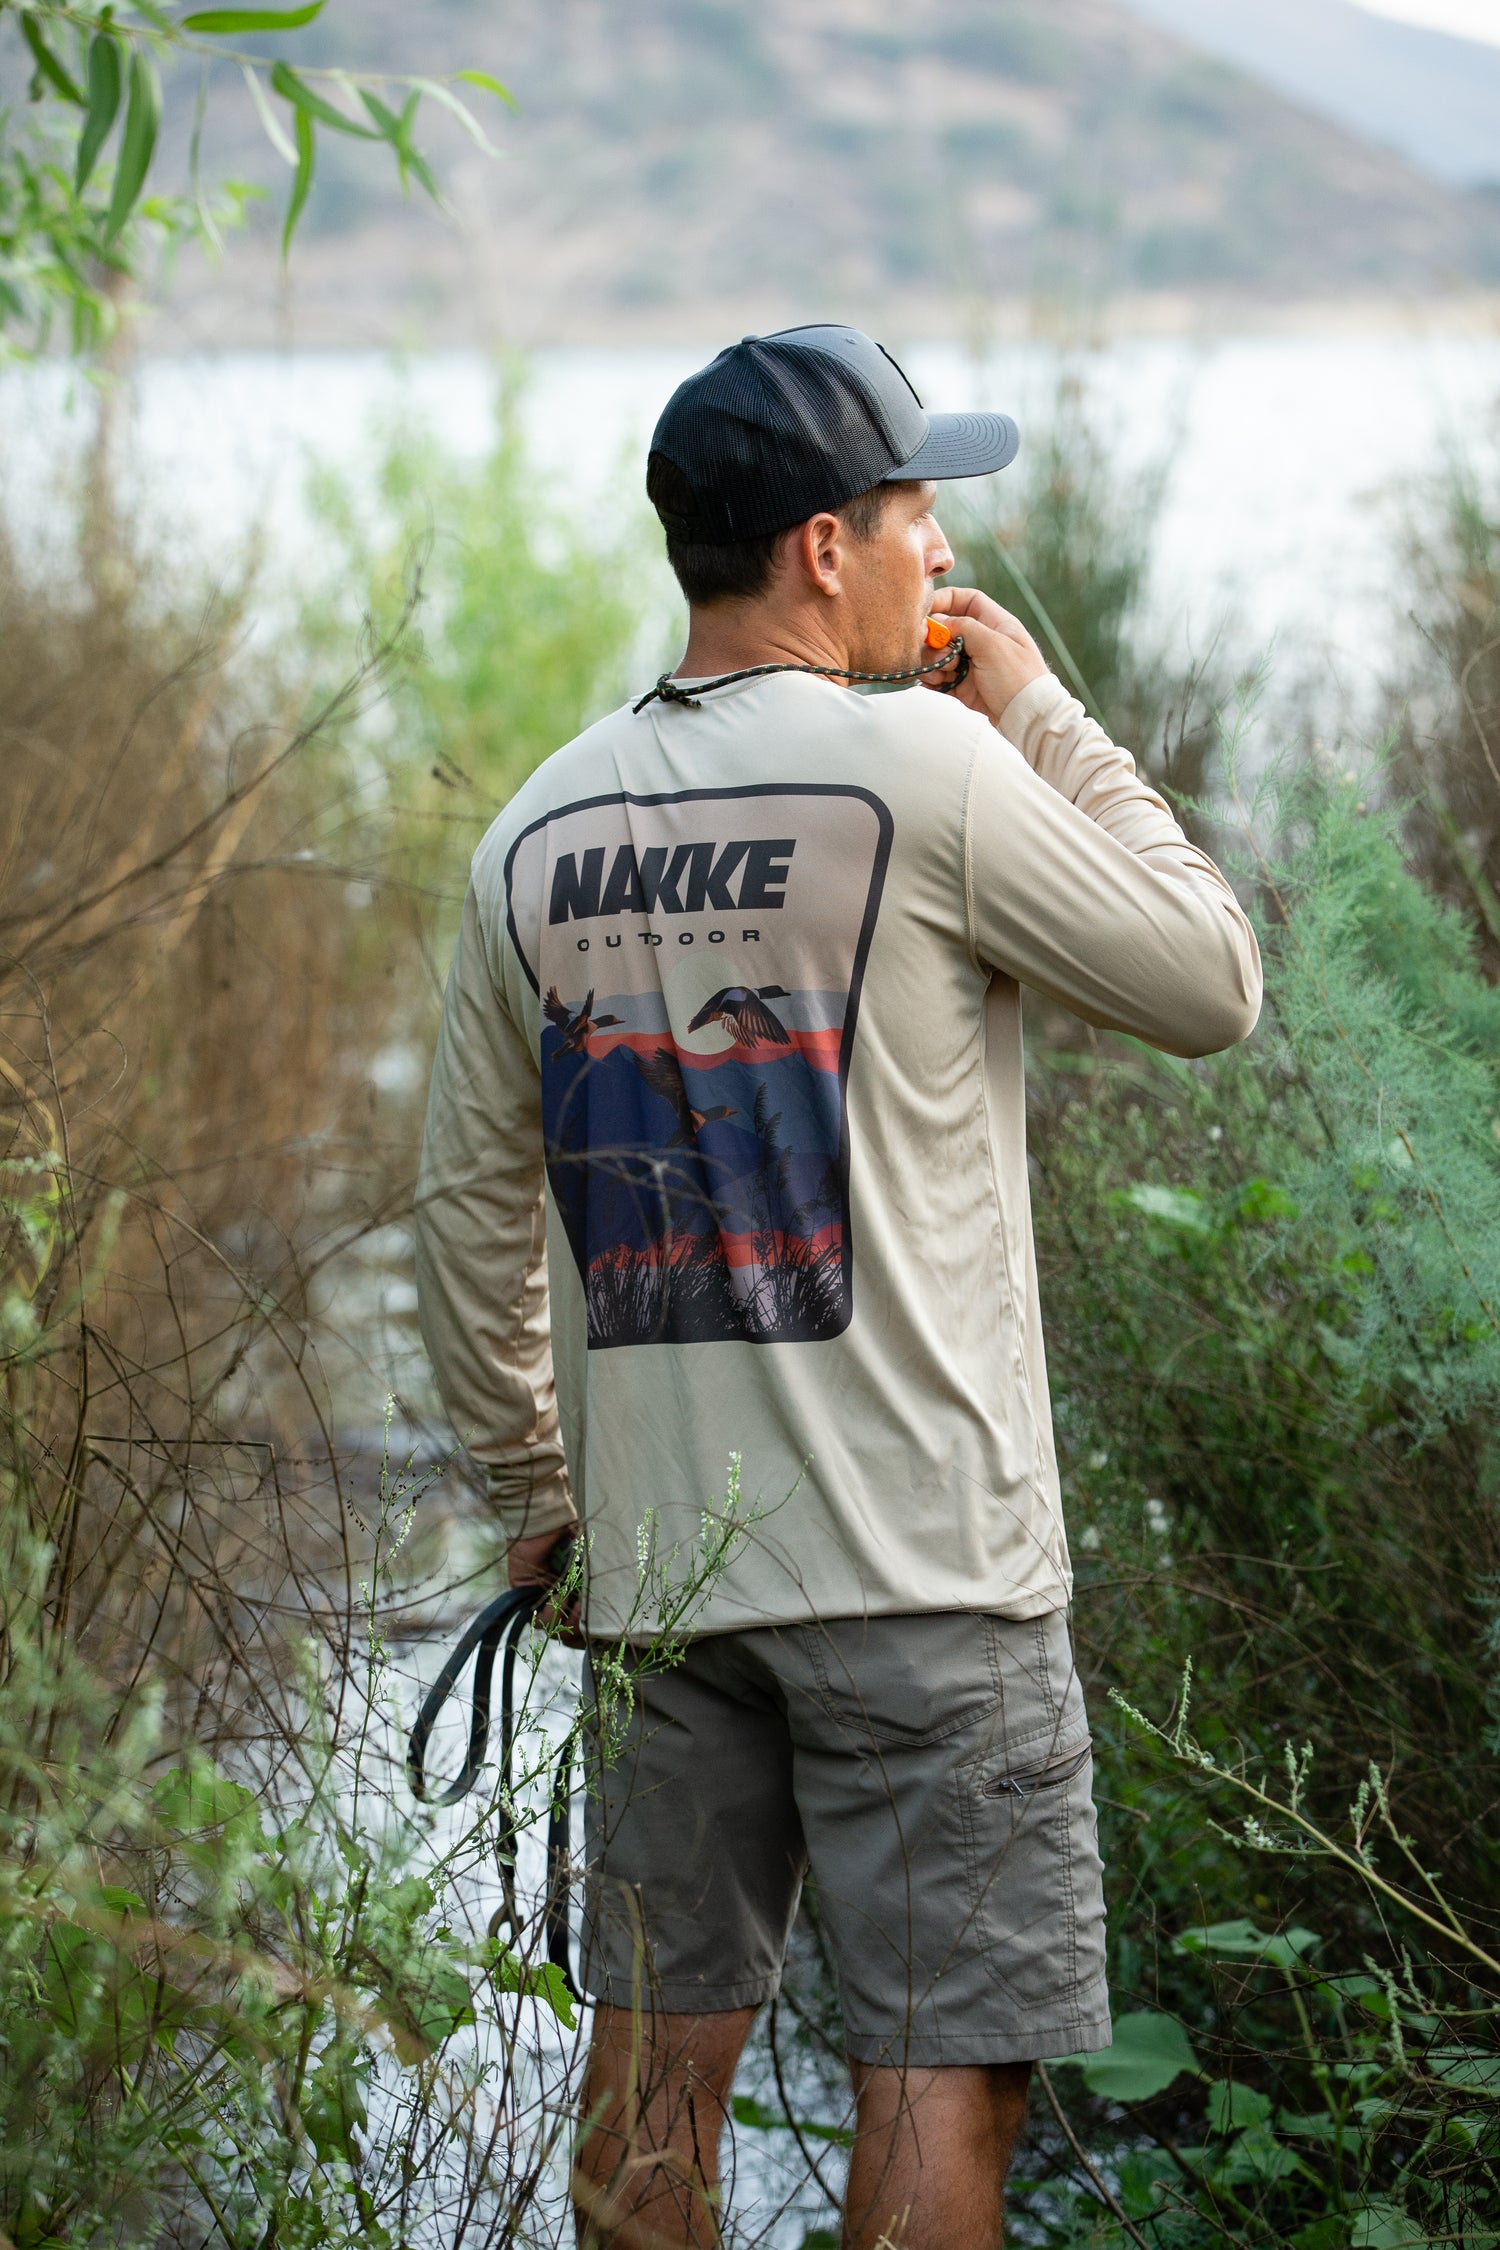 Our outdoor shirts are made for comfort and versatility in the outdoors